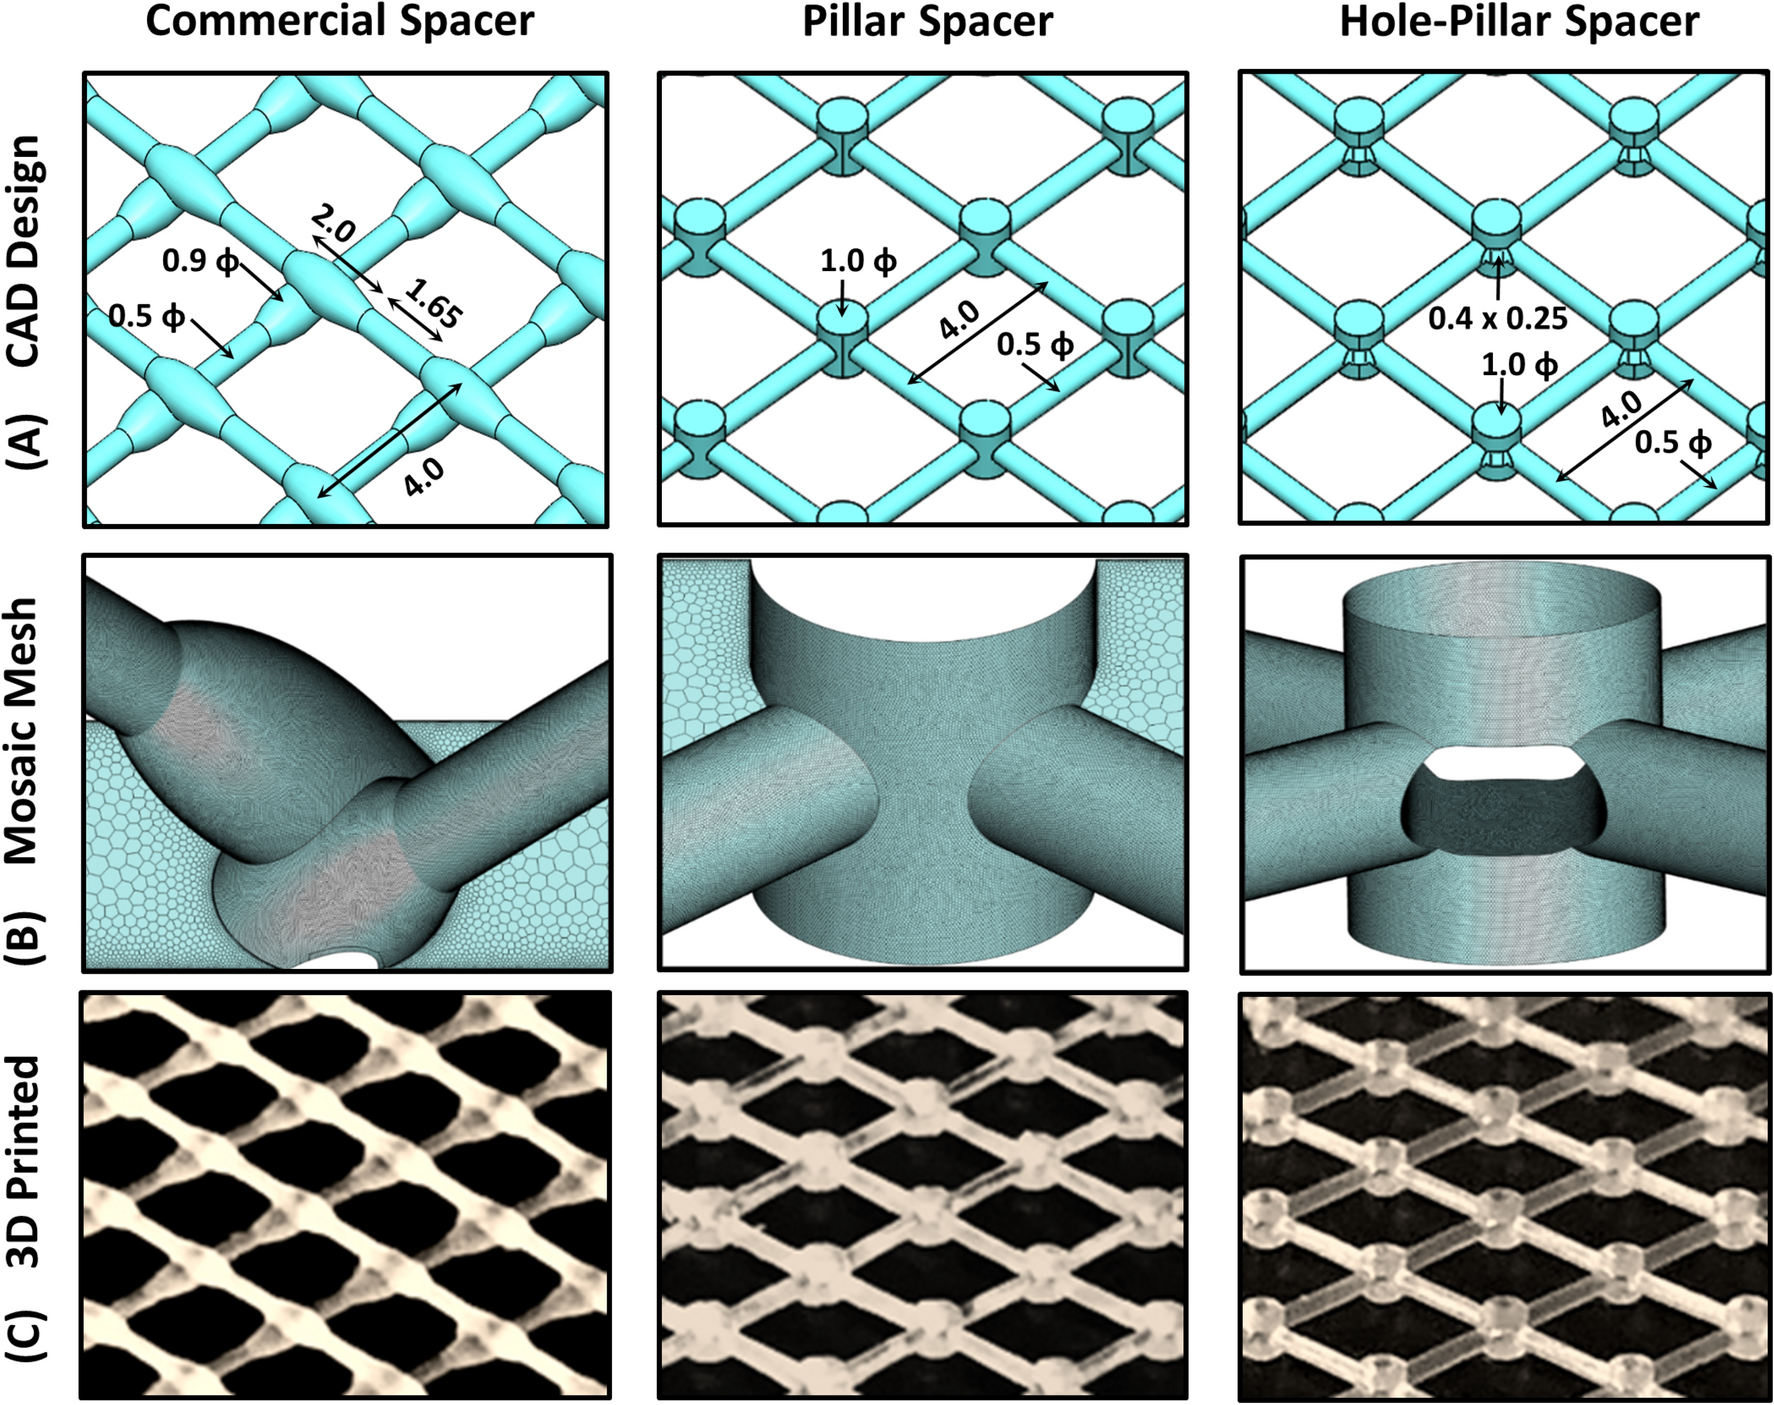 Novel hole-pillar spacer design for improved hydrodynamics and